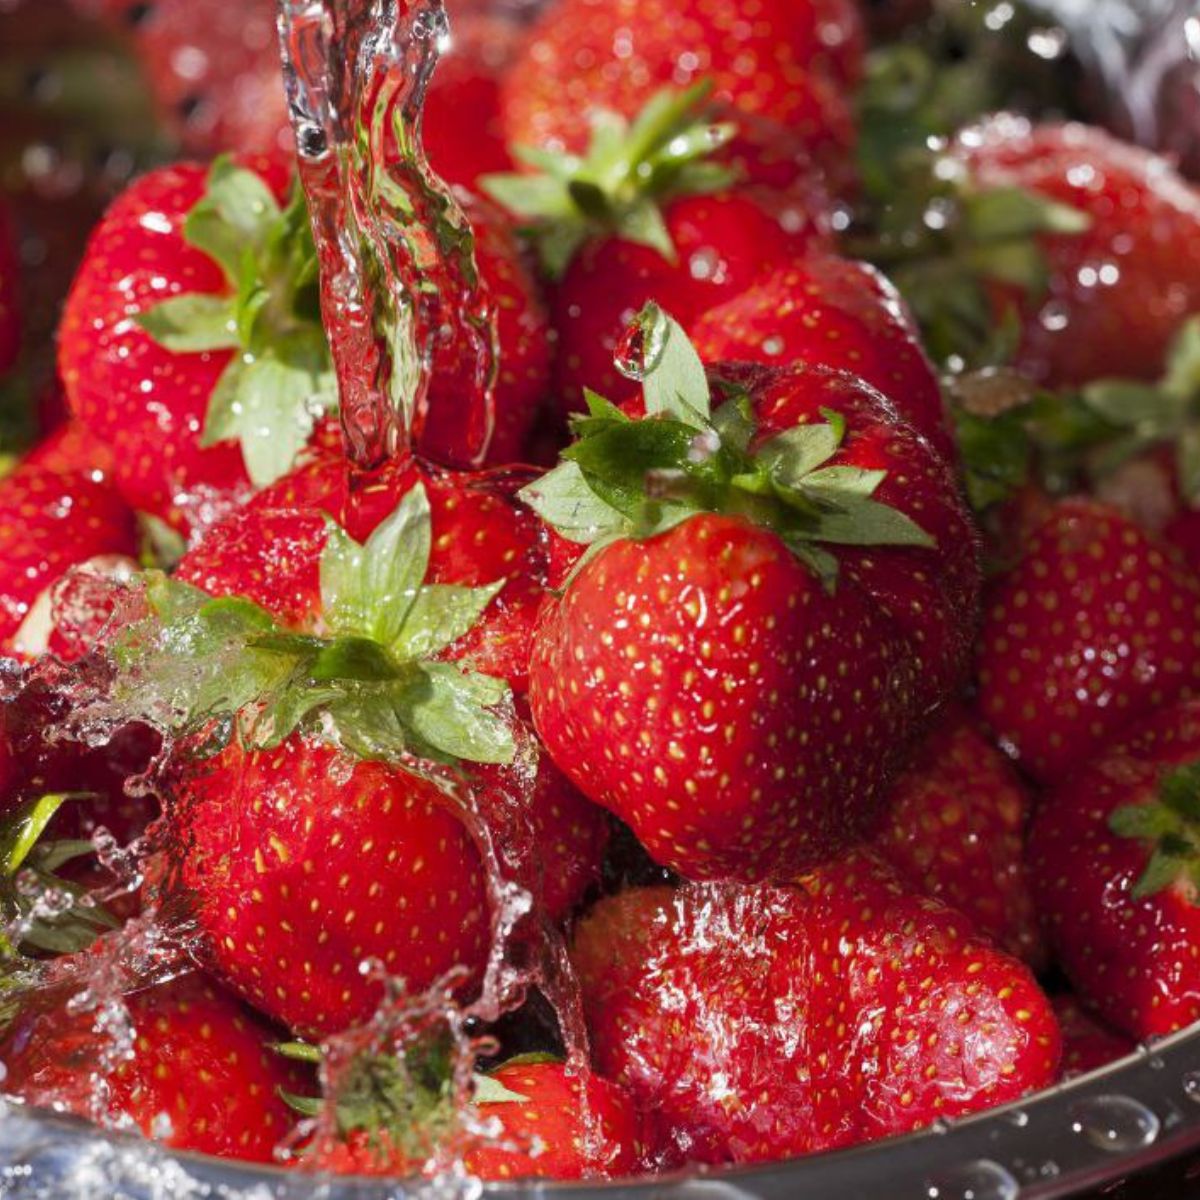 Save Those Spoiling Strawberries!